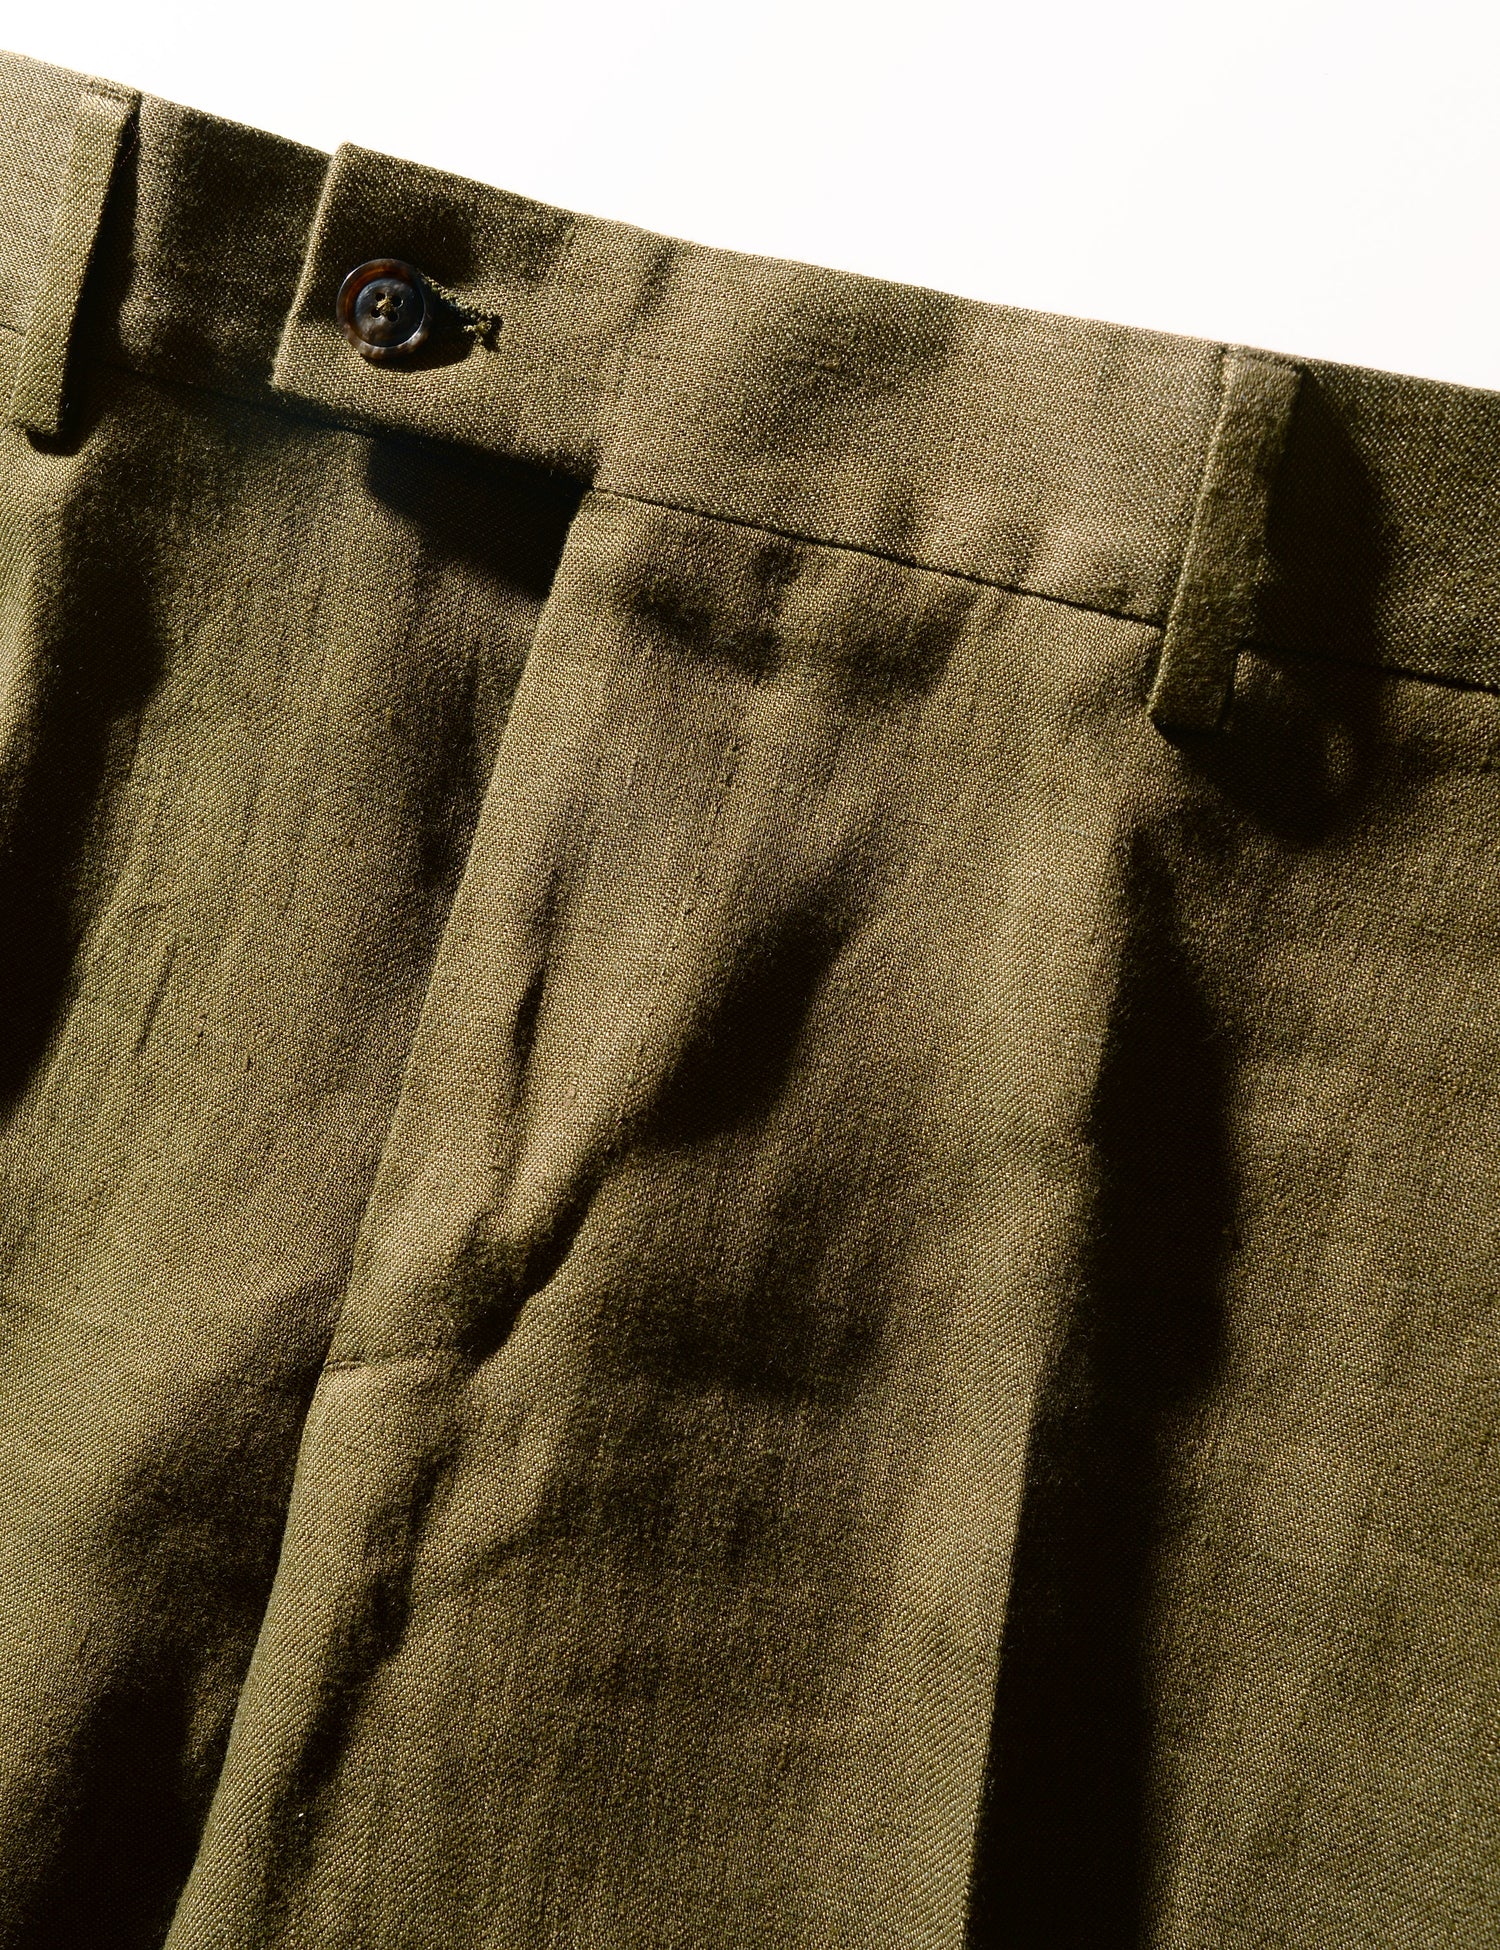 Detail shot of Brooklyn Tailors BKT50 Tailored Trousers in Linen Twill - Moss front 